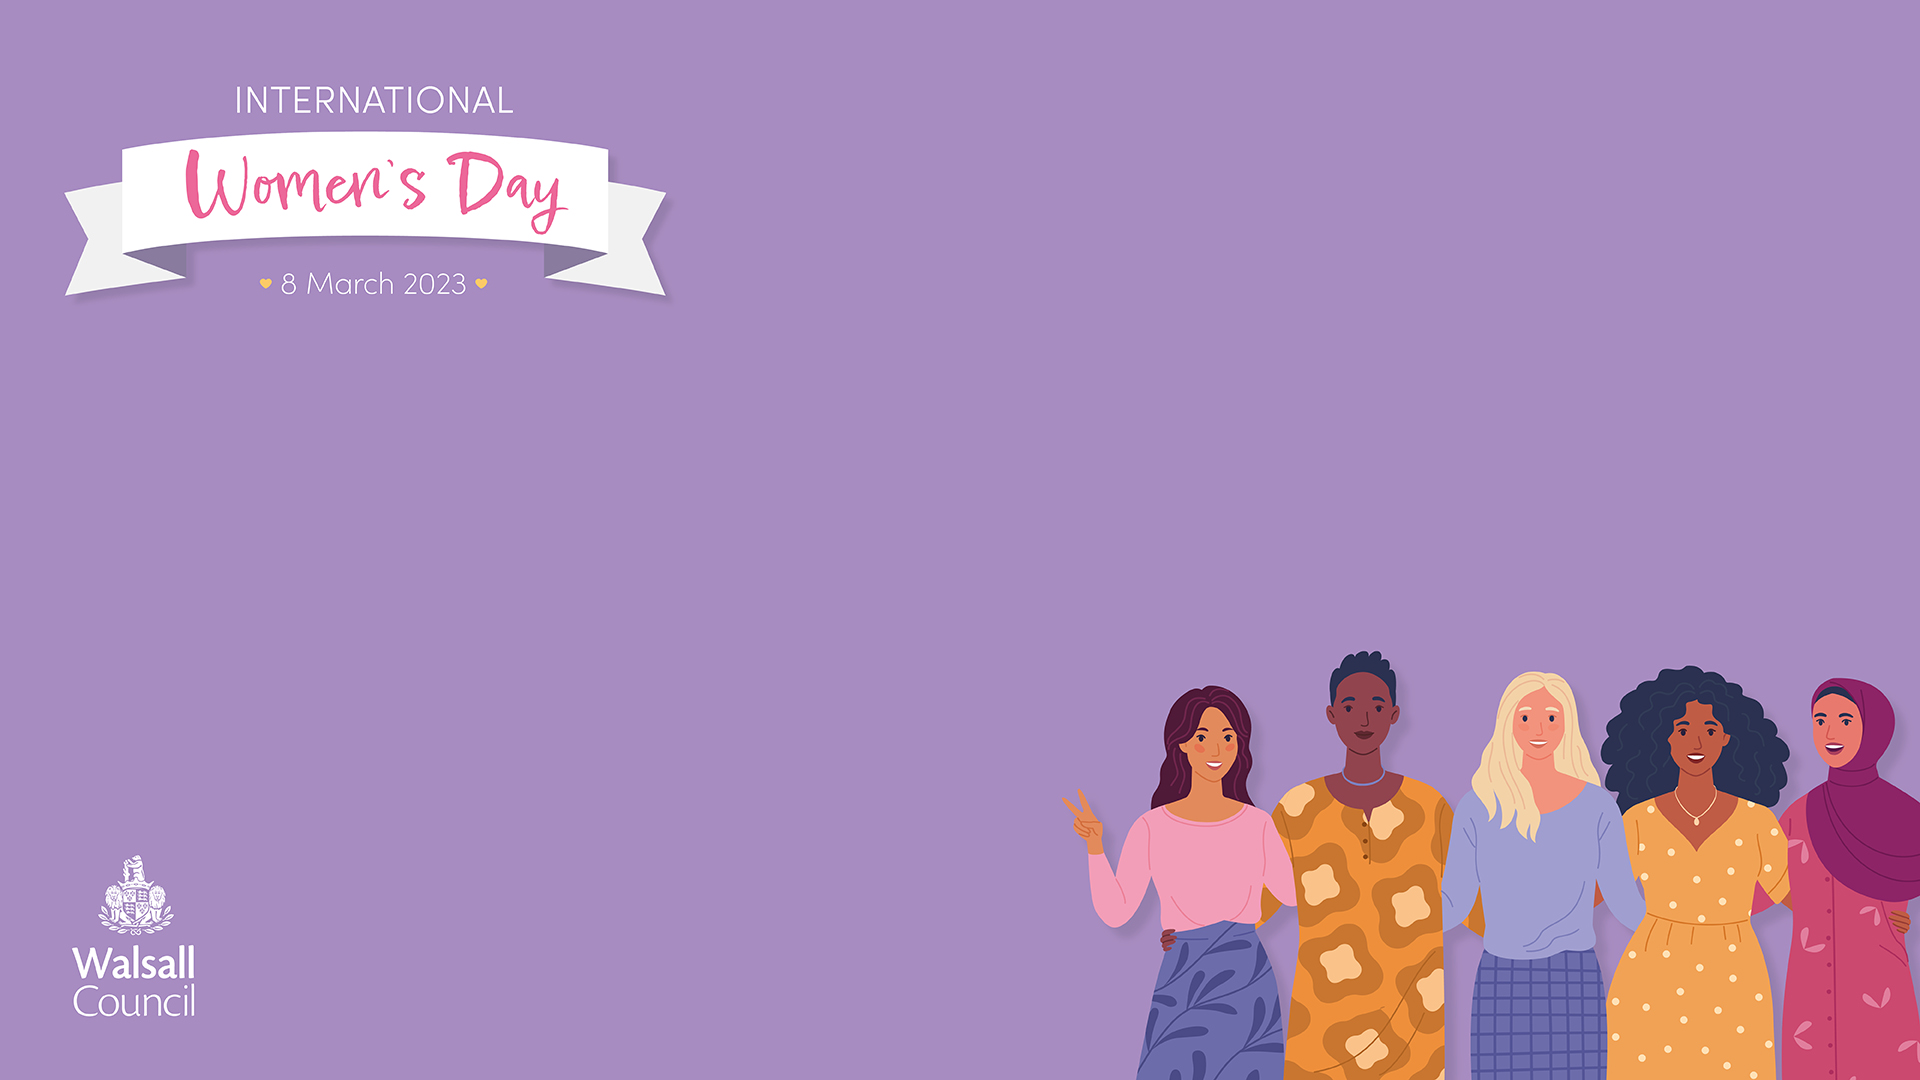 A purple background with an International Women's Day banner. In the bottom right corner is an illustration of 5 women.